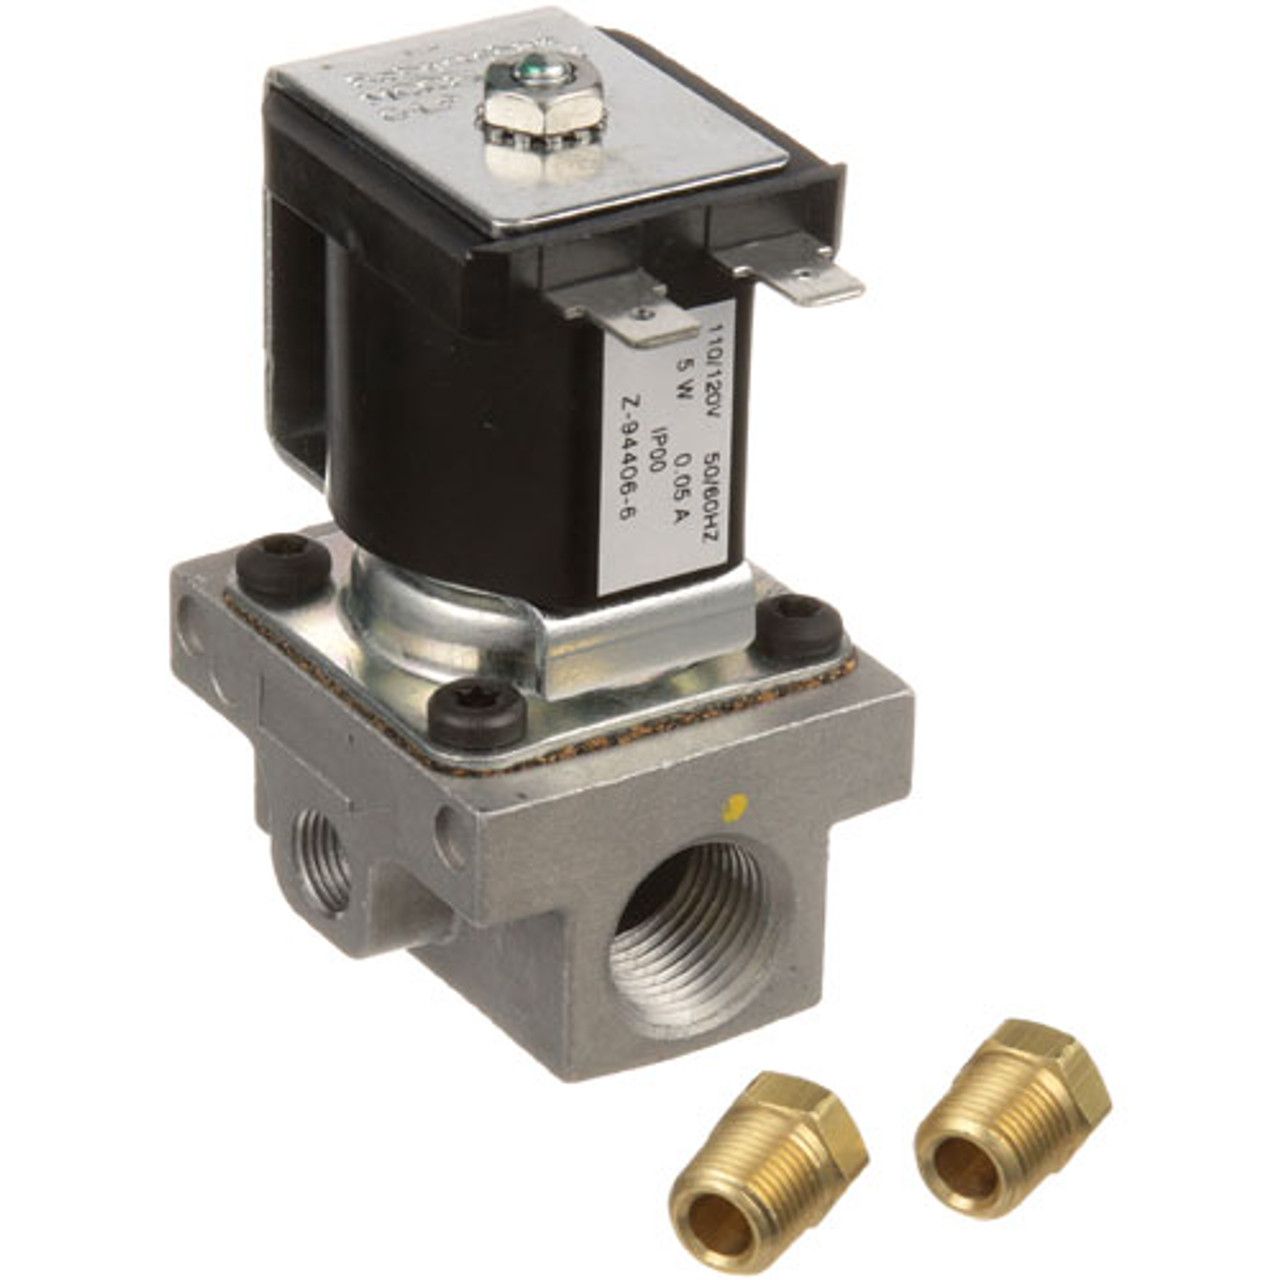 Gas Solenoid Valve - Replacement Part For Hobart 920608-00011